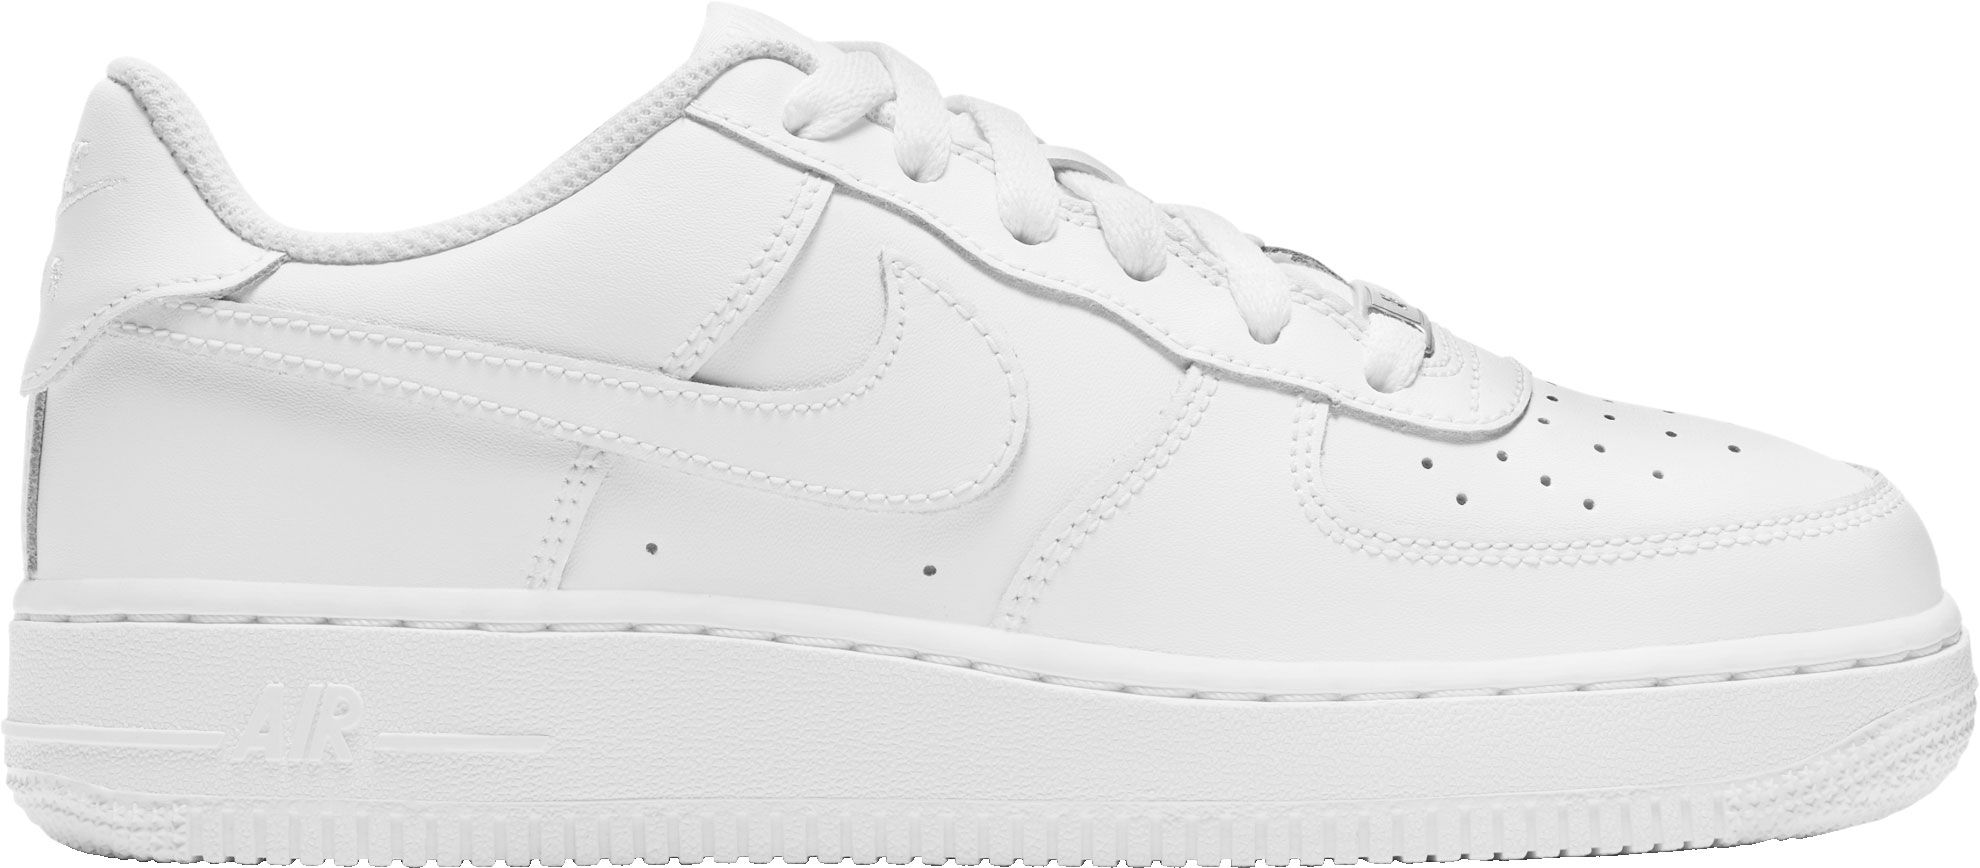 where to buy cheap nike air force 1